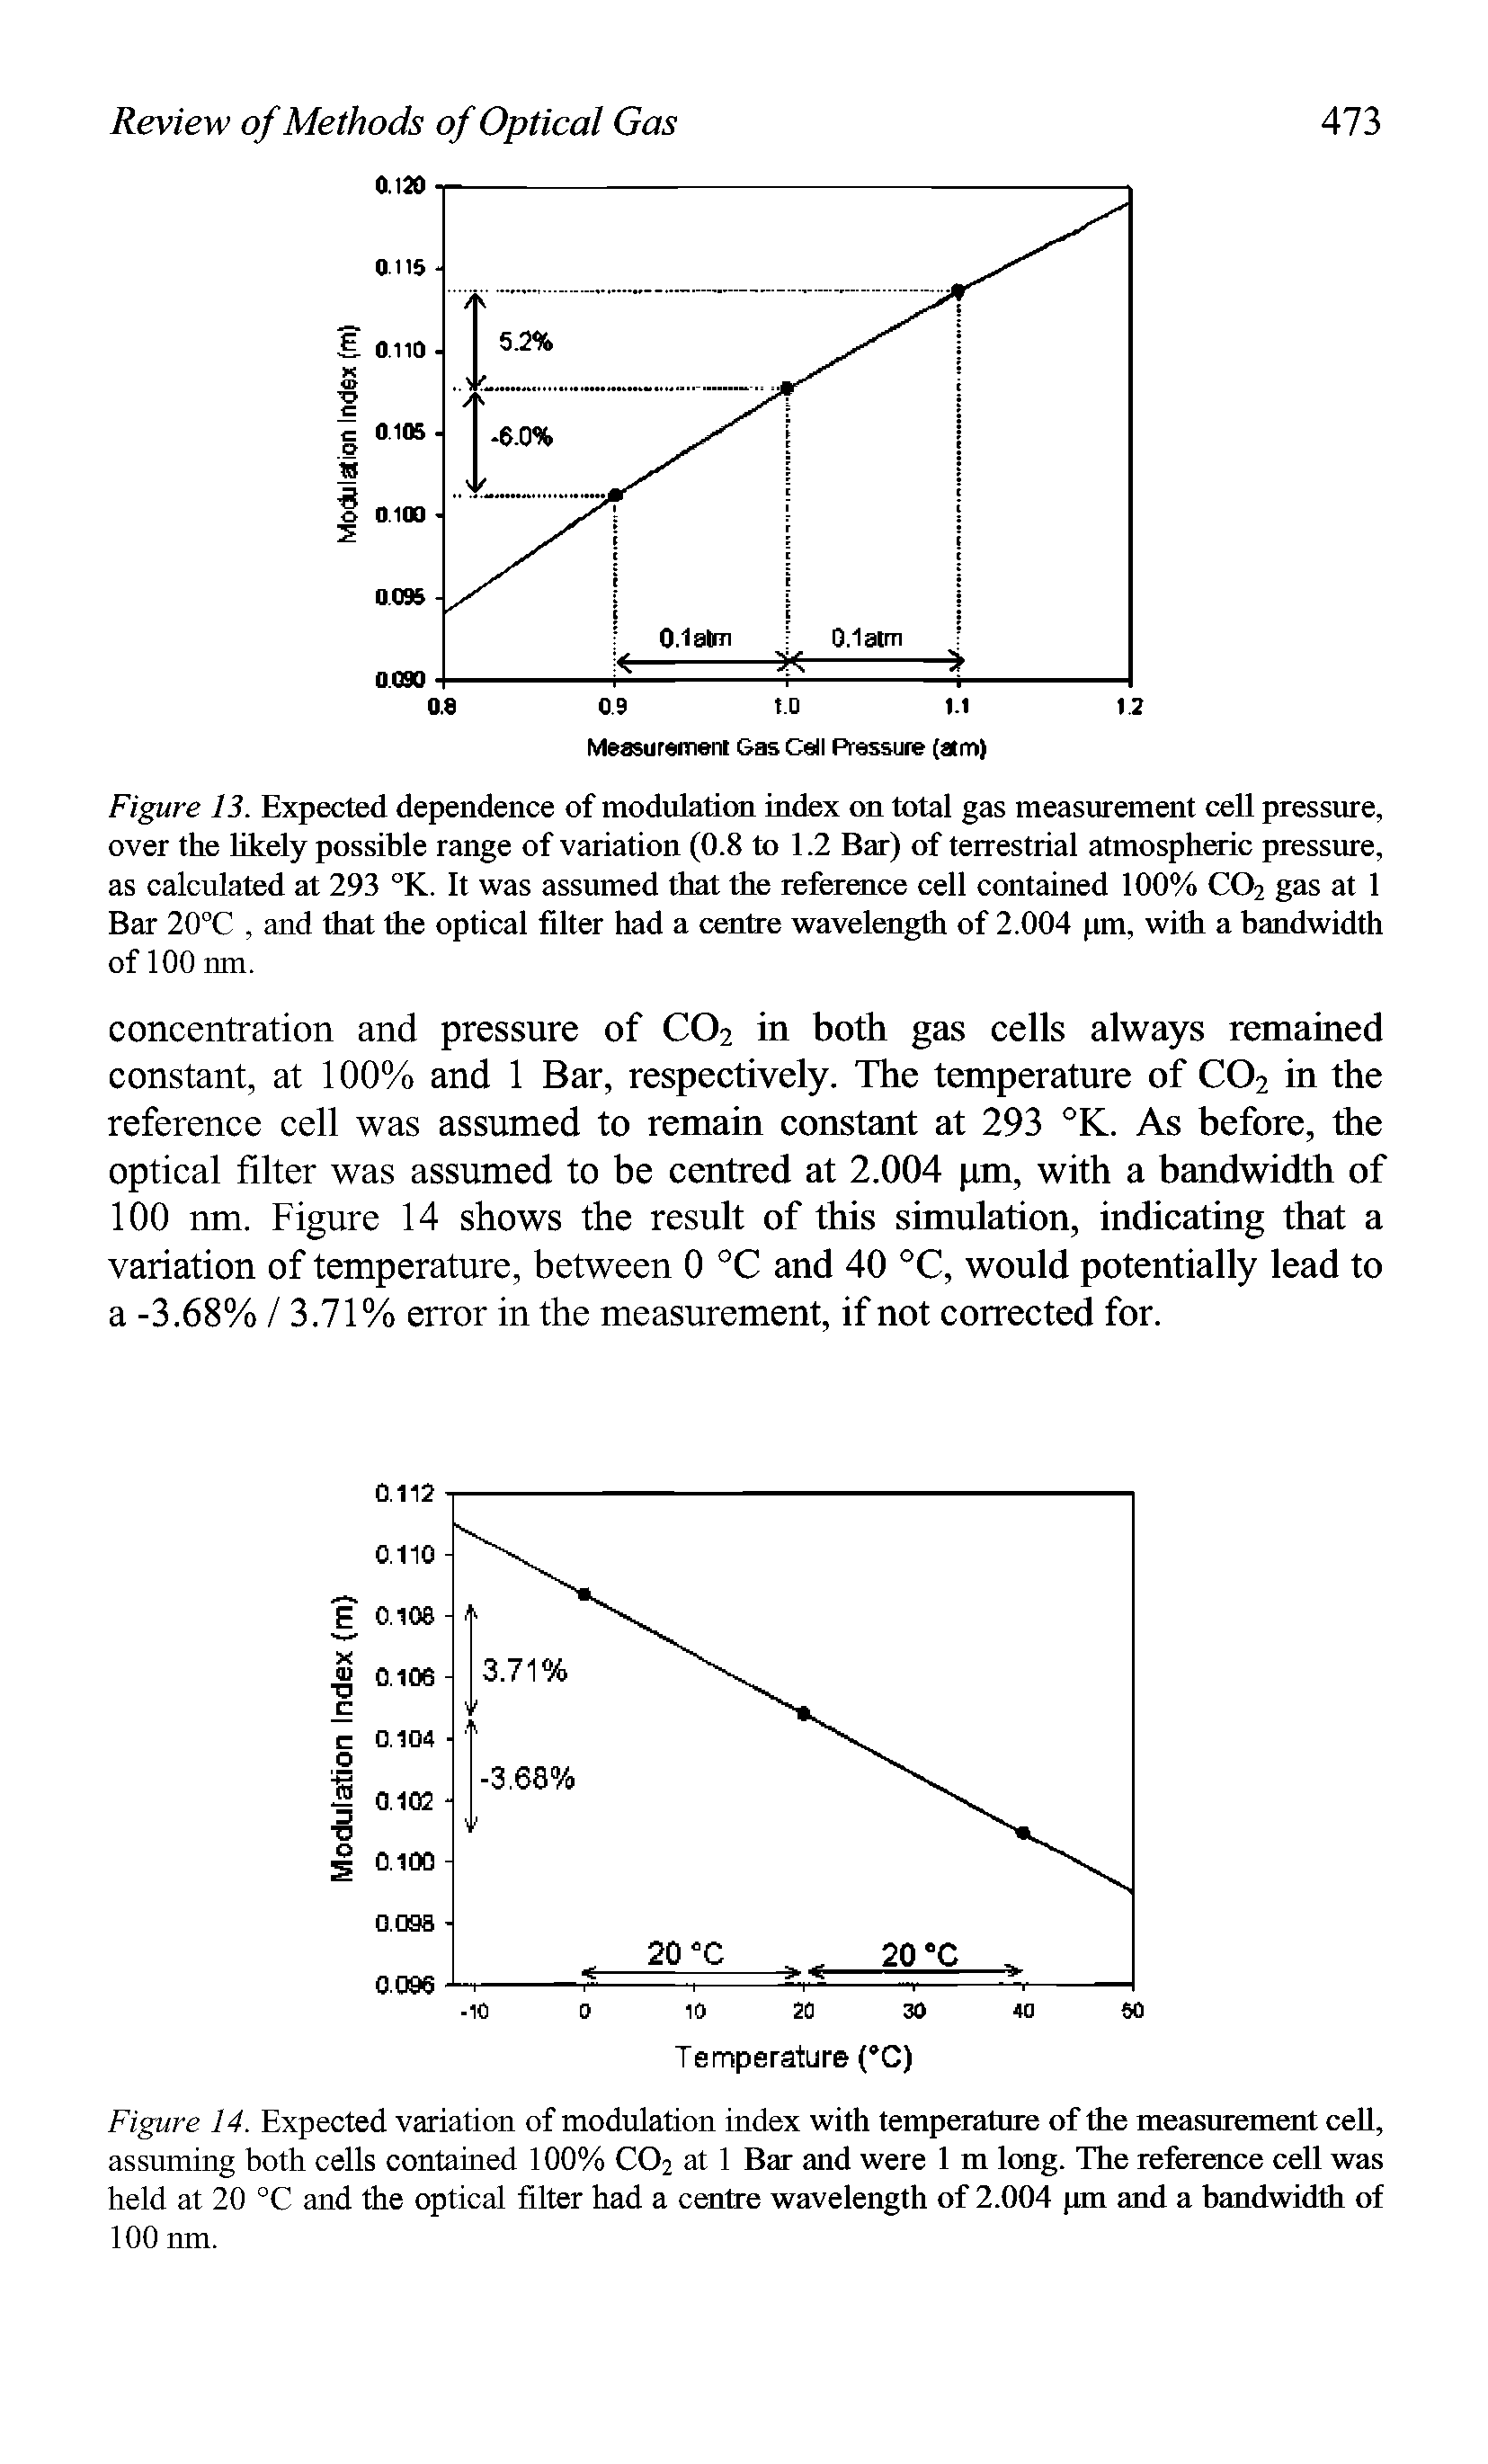 Figure 13. Expected dependence of modulation index on total gas measurement cell pressure, over the likely possible range of variation (0.8 to 1.2 Bar) of terrestrial atmospheric pressure, as calculated at 293 °K. It was assumed that the reference cell contained 100% C02 gas at 1 Bar 20°C, and that the optical fdter had a centre wavelength of 2.004 pm, with a bandwidth of 100 nm.